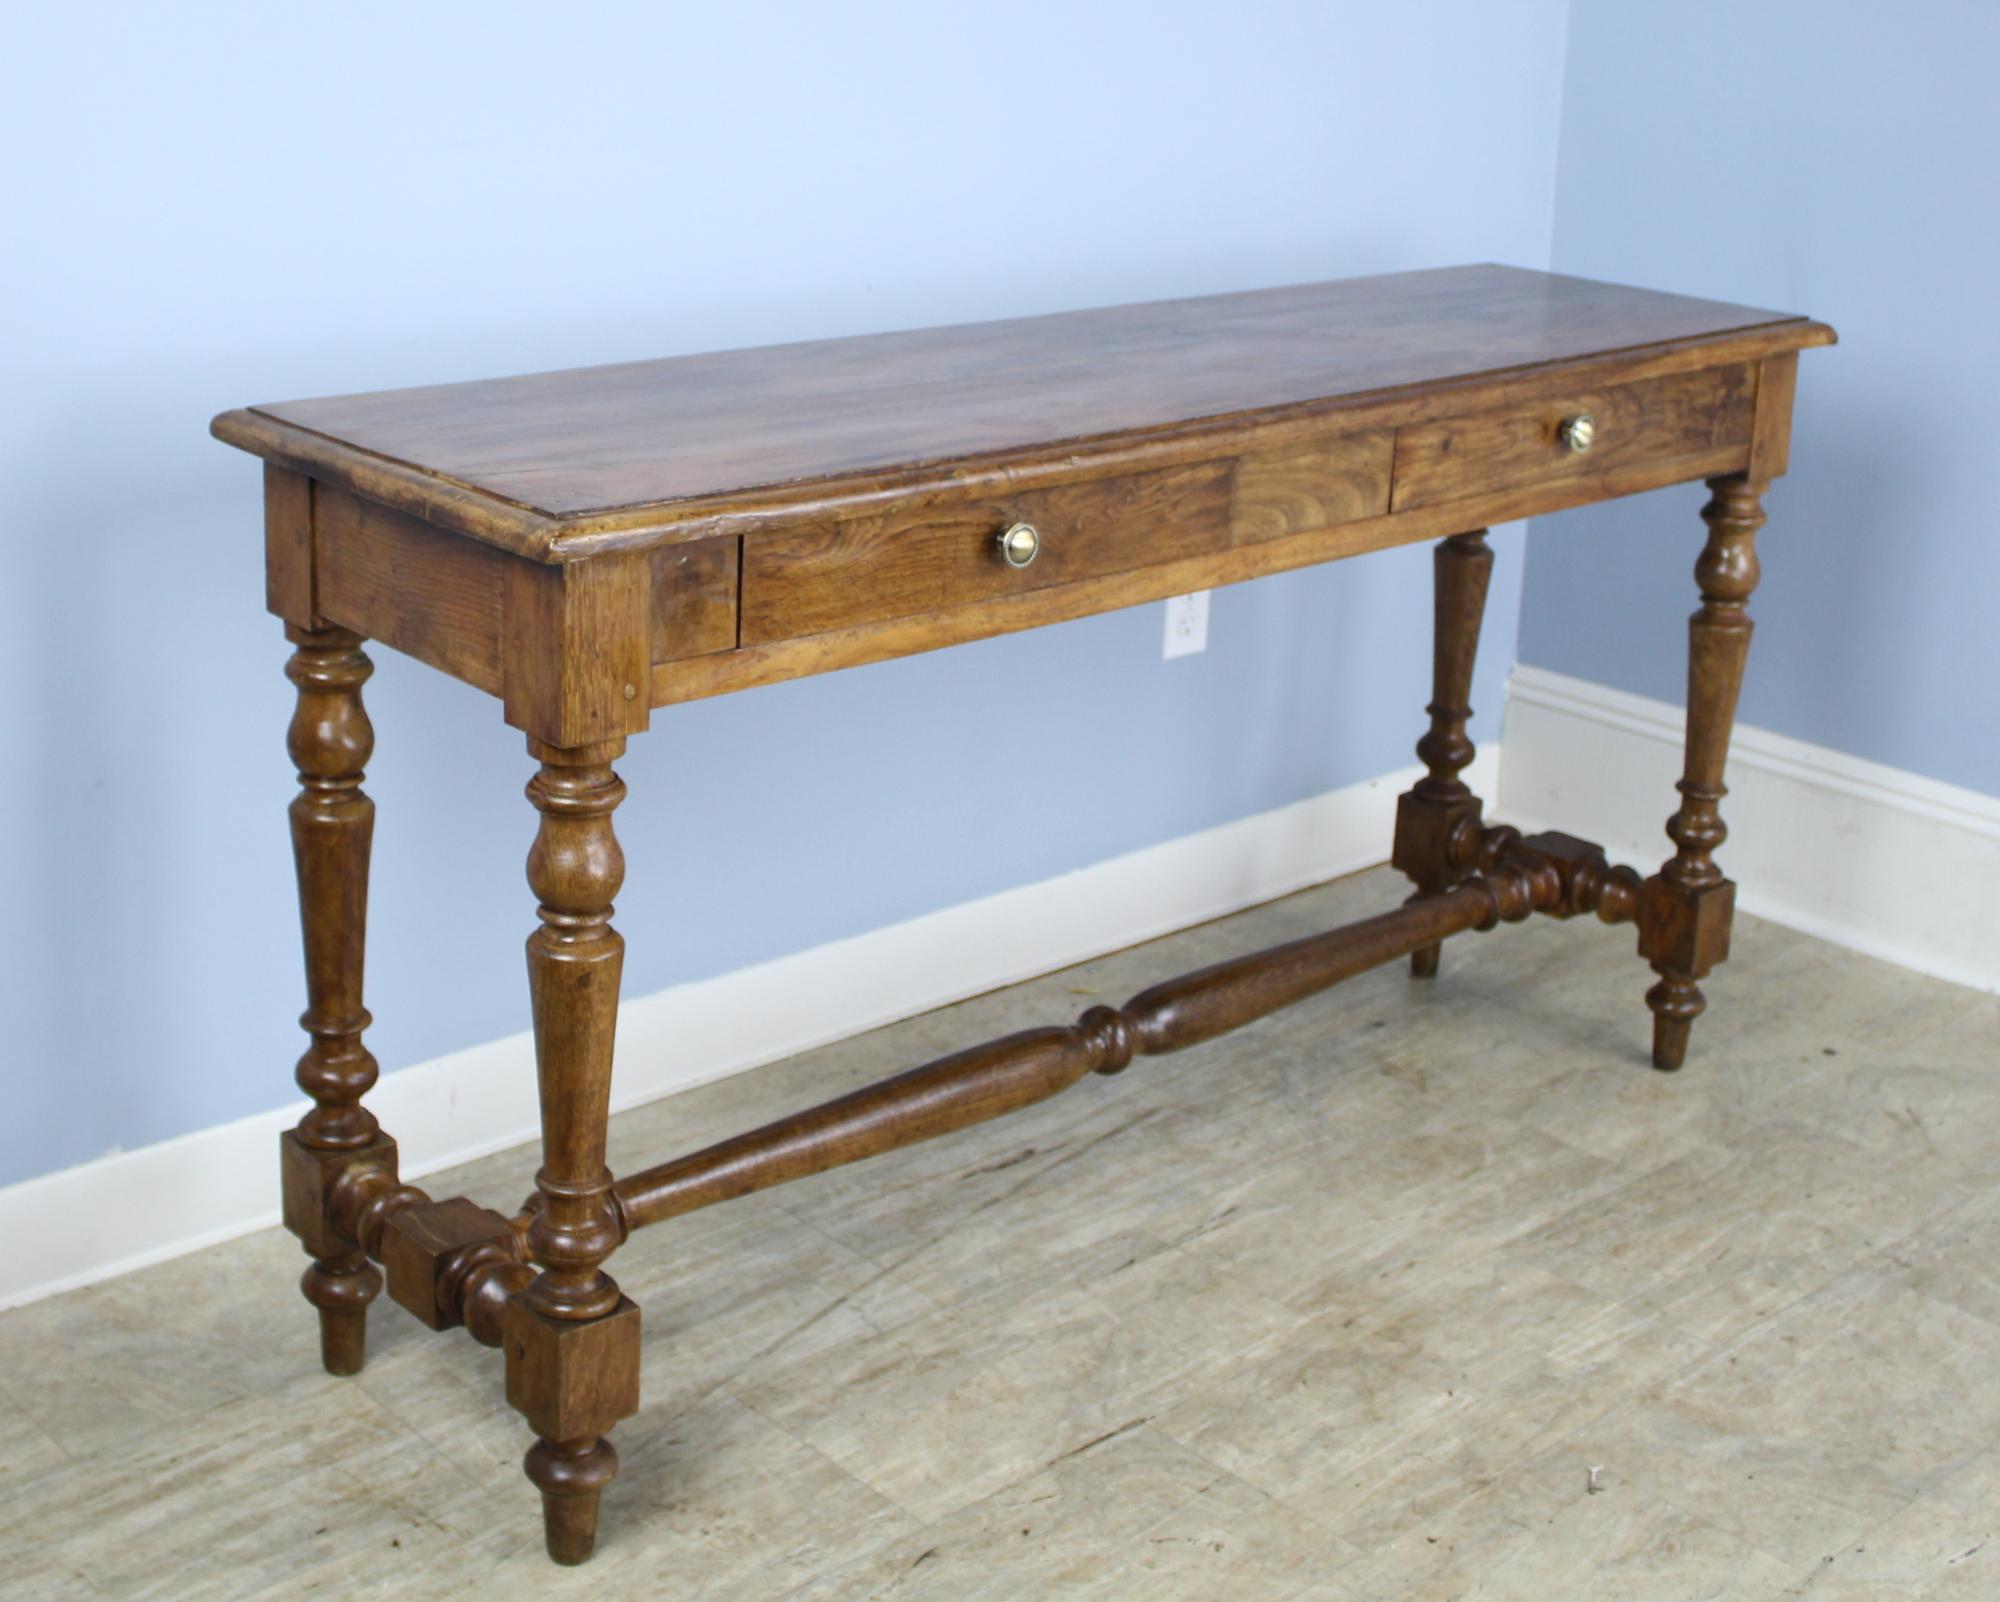 A splendid turned leg server, console, or sideboard in polished oak. The turned stretcher support enhances the look. Two wide drawers add a note of utility. This piece would be right in the front hall, but its modest depth of 17.5